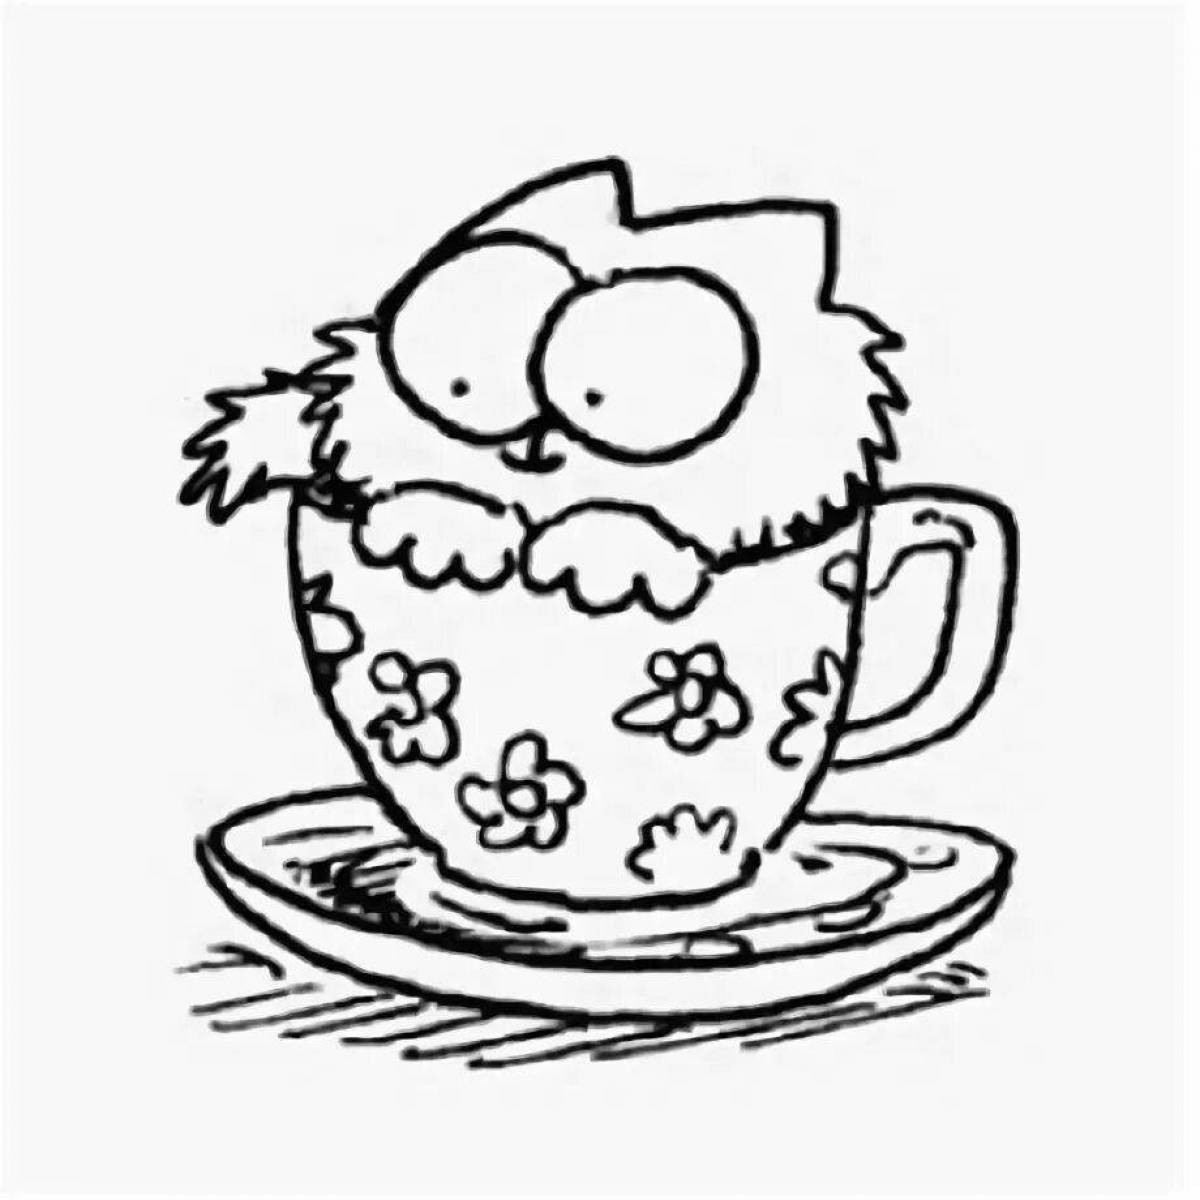 Silly cat in a mug coloring book